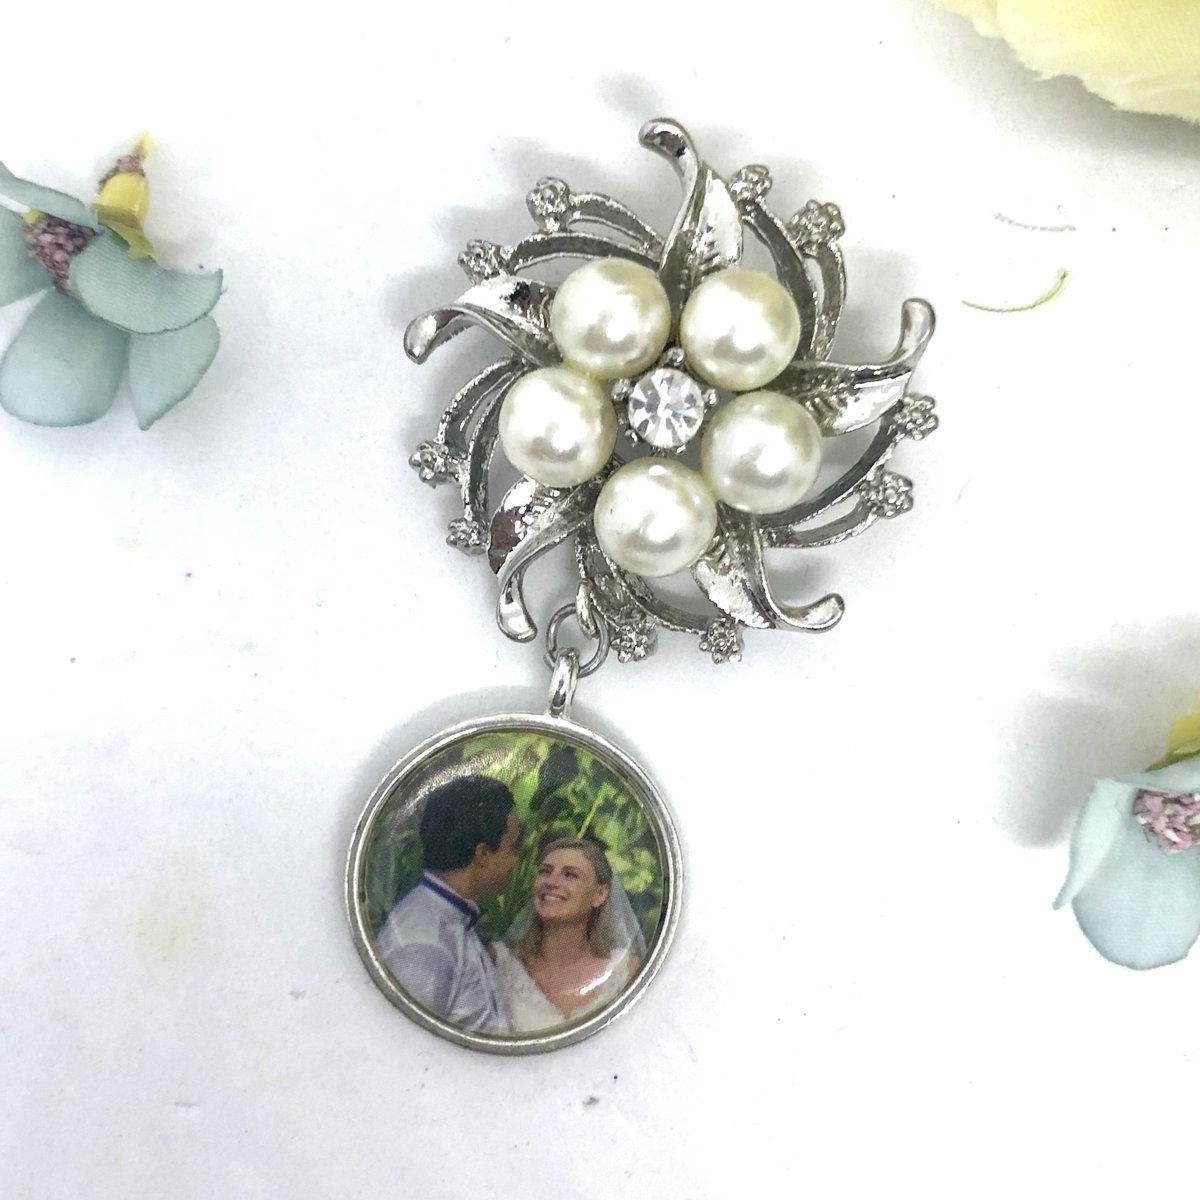 SILVER PEARL BROOCH Bouquet Memory Charm Pin - Round Plain Edge Memory Charm @bejewelled_bridal #memorycharm#photocharm #photocharms #bouquetcharm #picturecharm#bridalaccessories